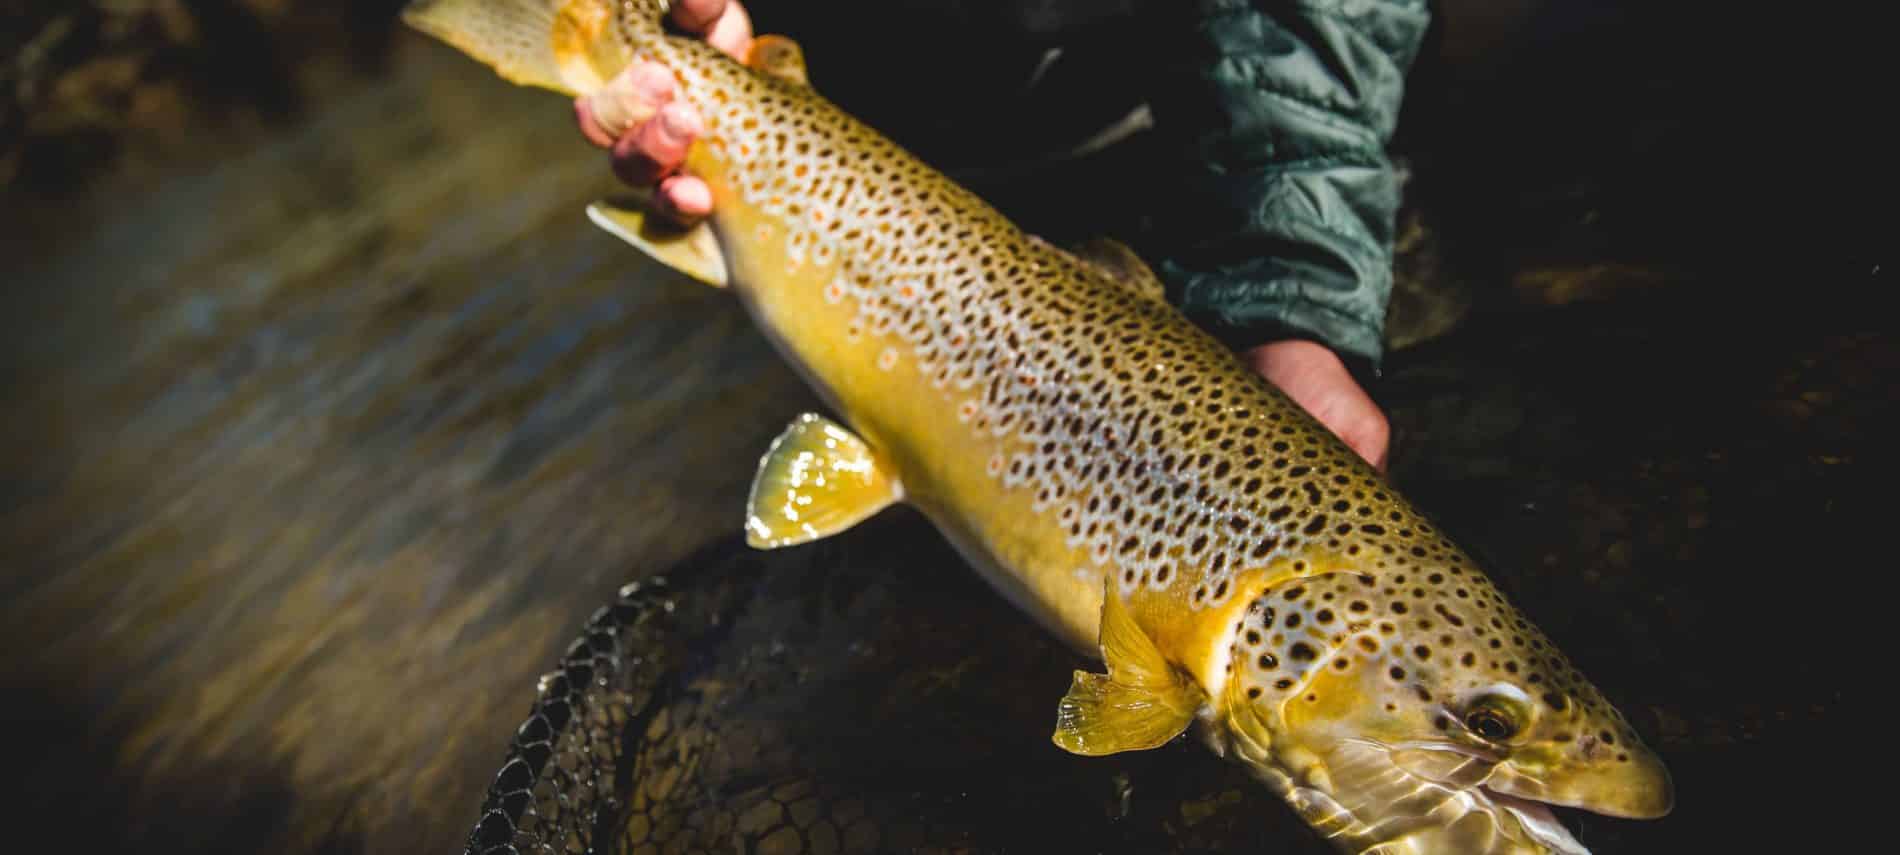 Hands holding a large trout, brownish with dark spots. Water and net visible.